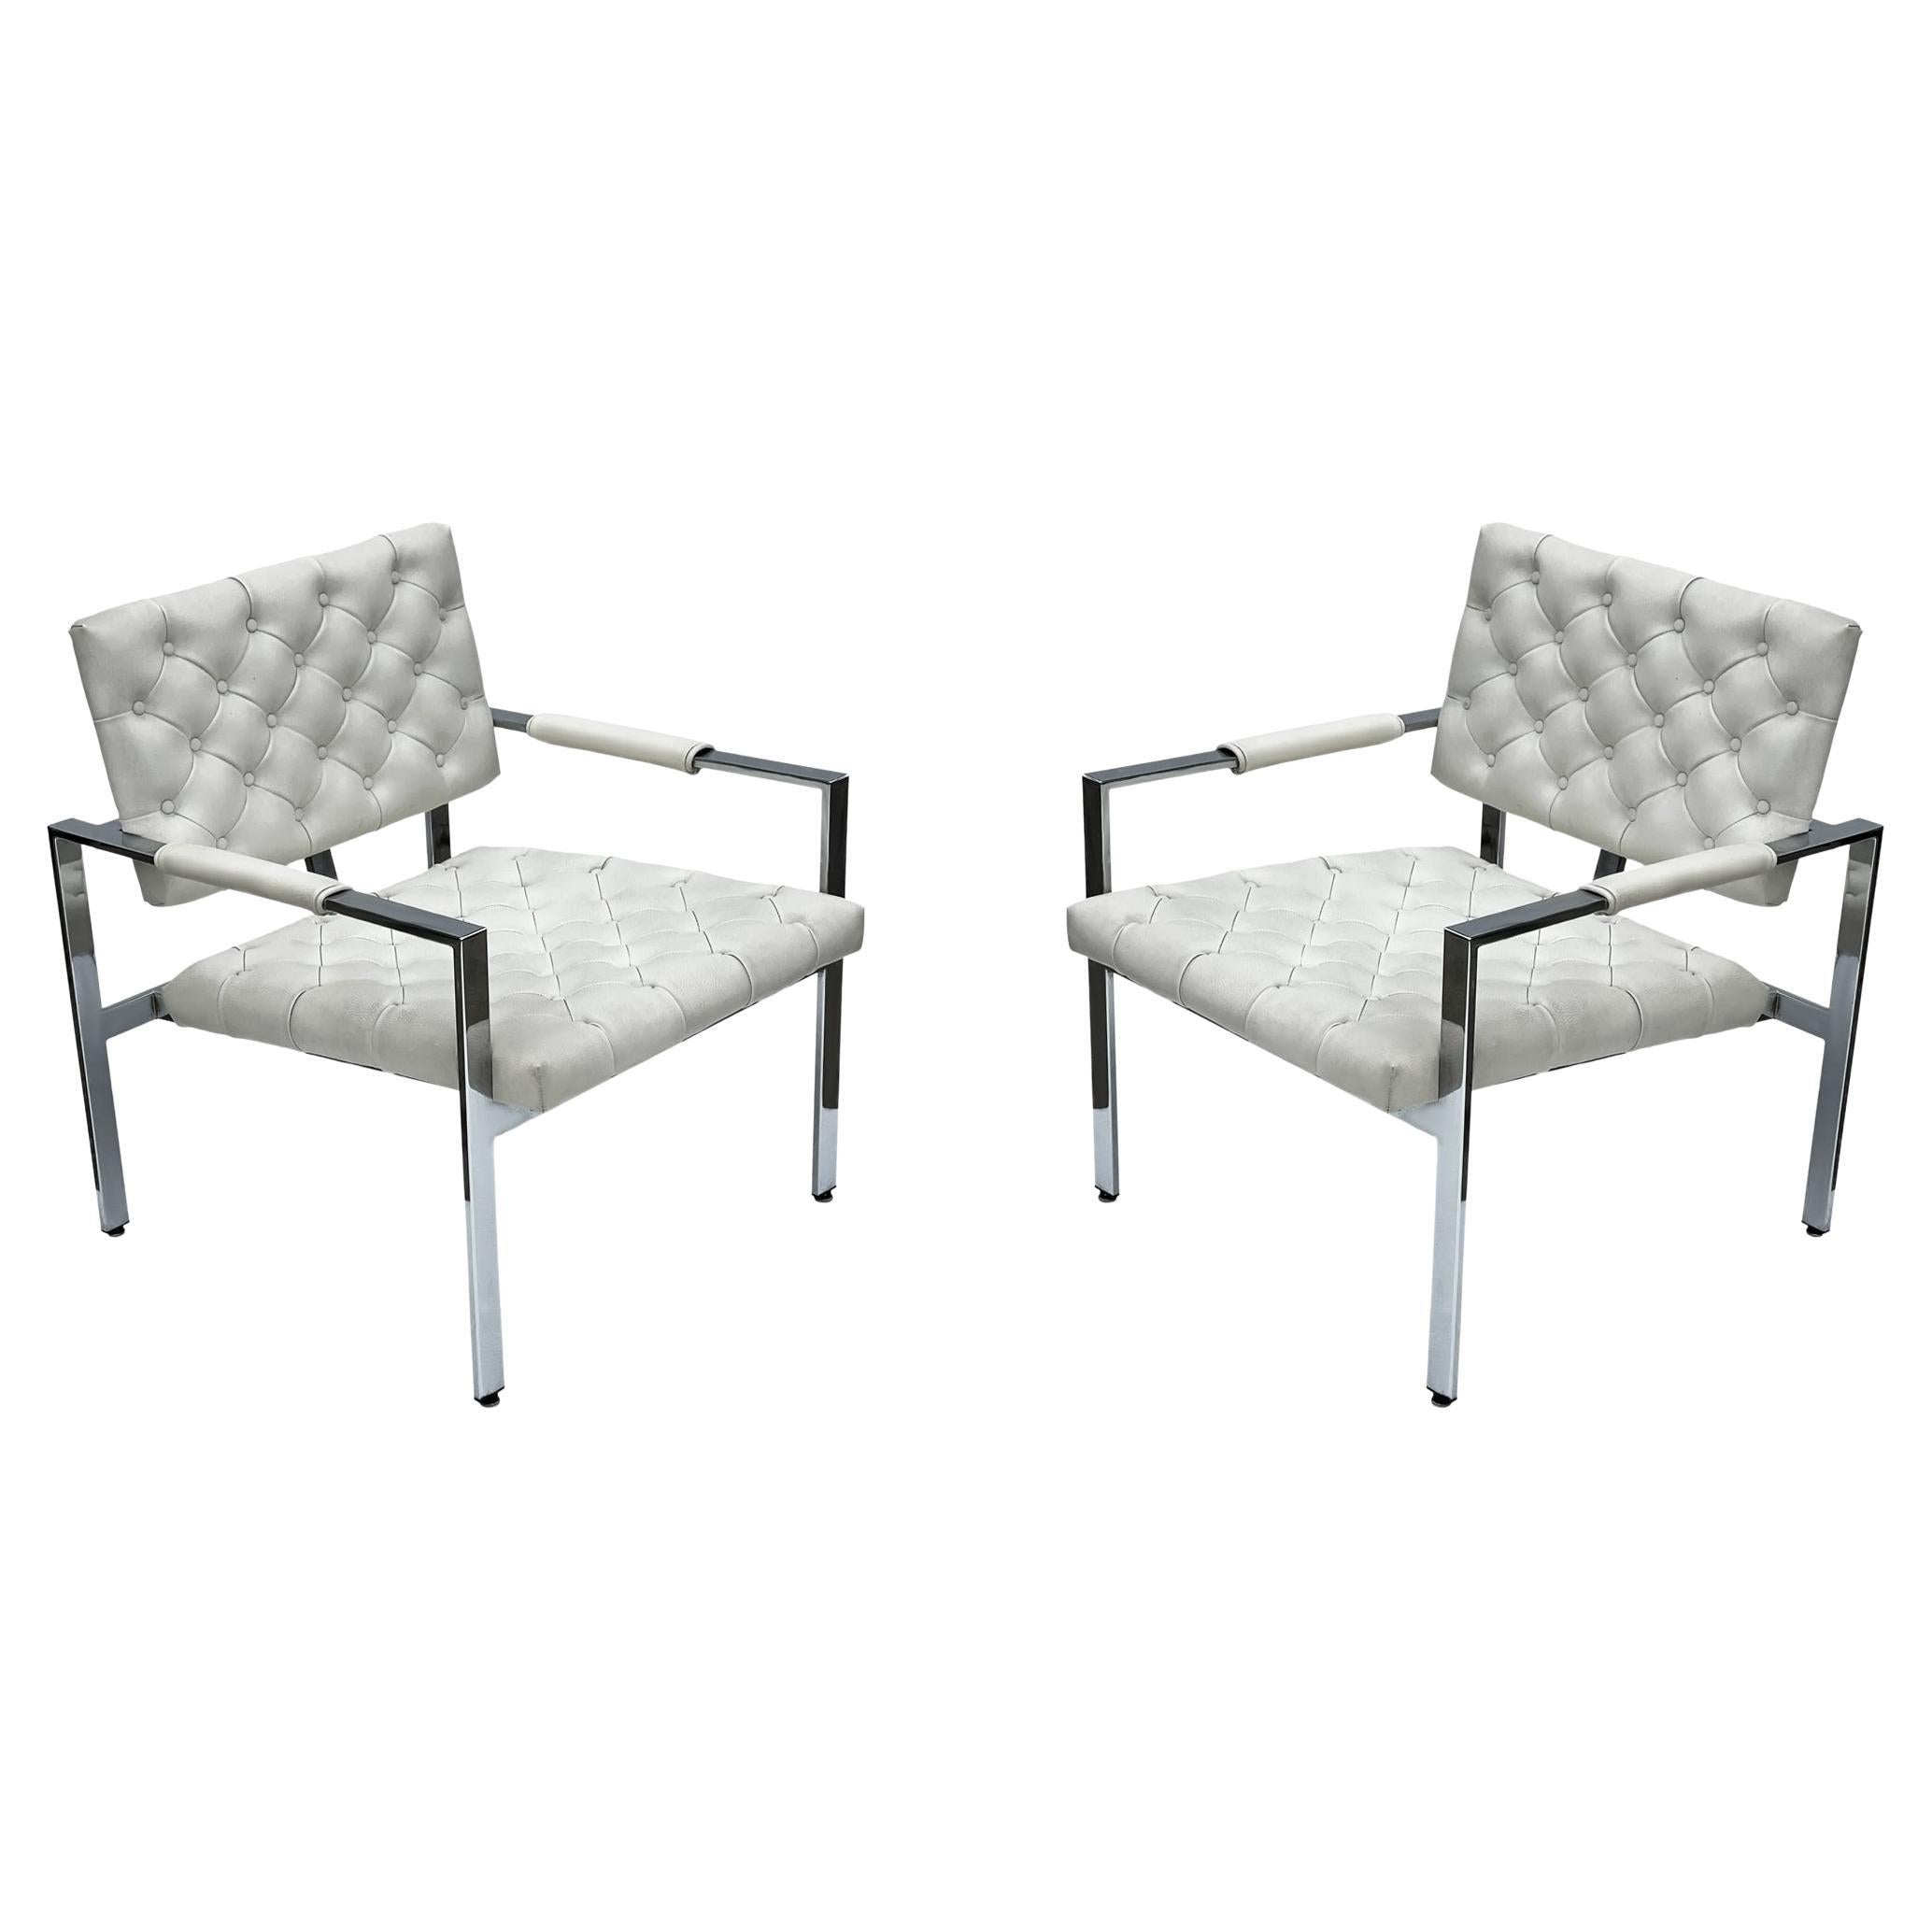 Pair Mid-Century Modern Chrome & White Tufted Lounge Chairs After Harvey Probber For Sale